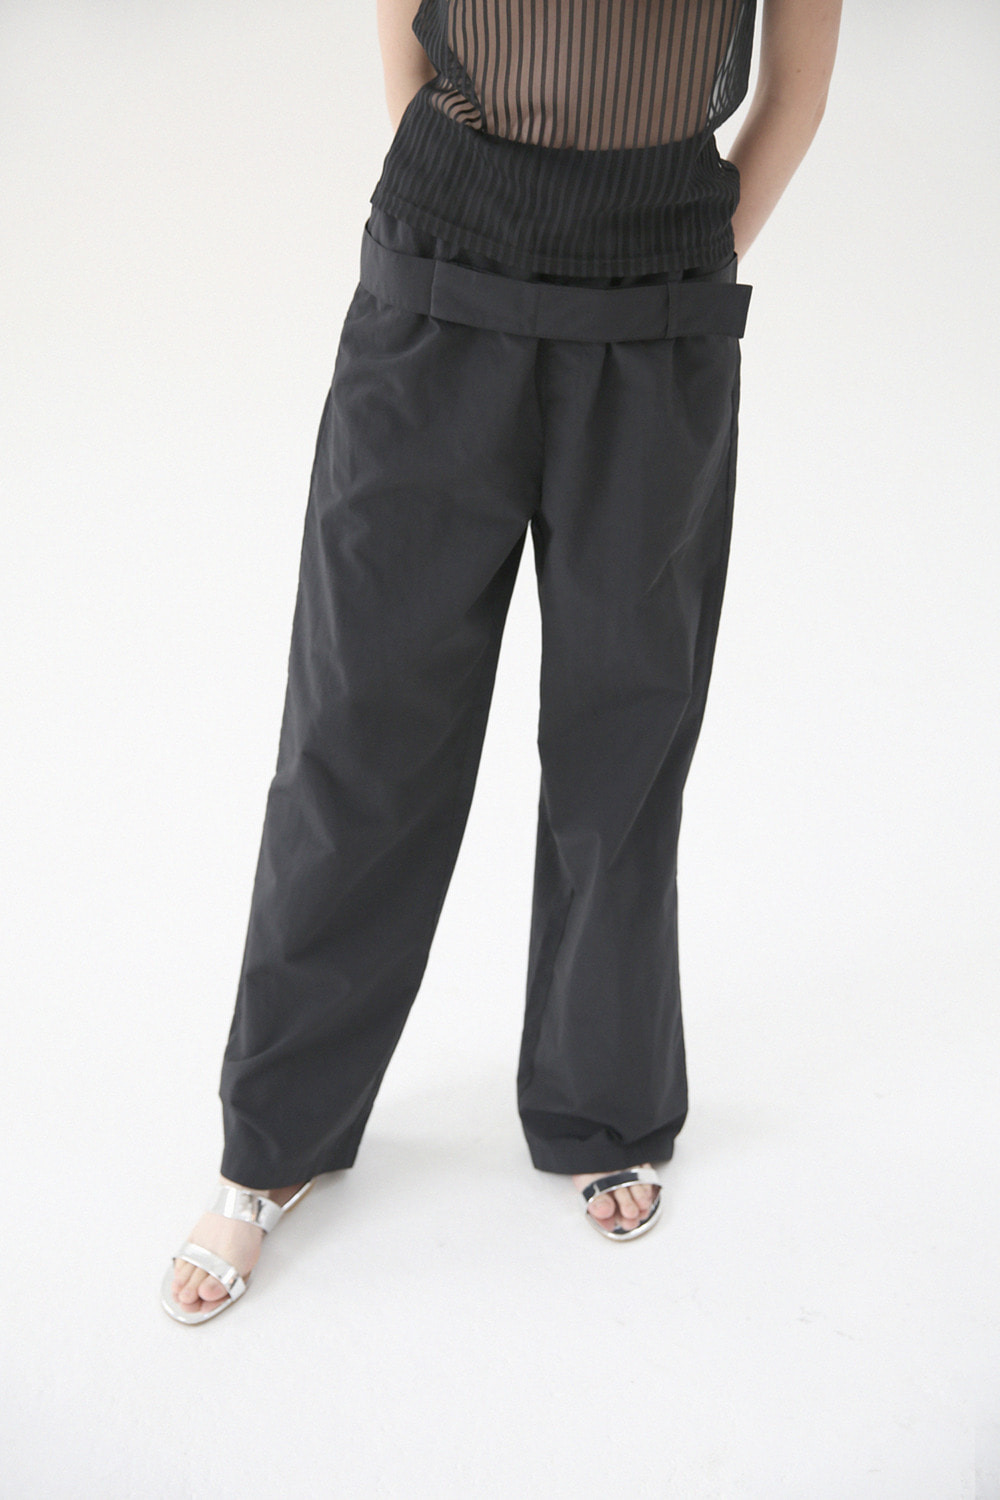 Belted trouser [2 colors]